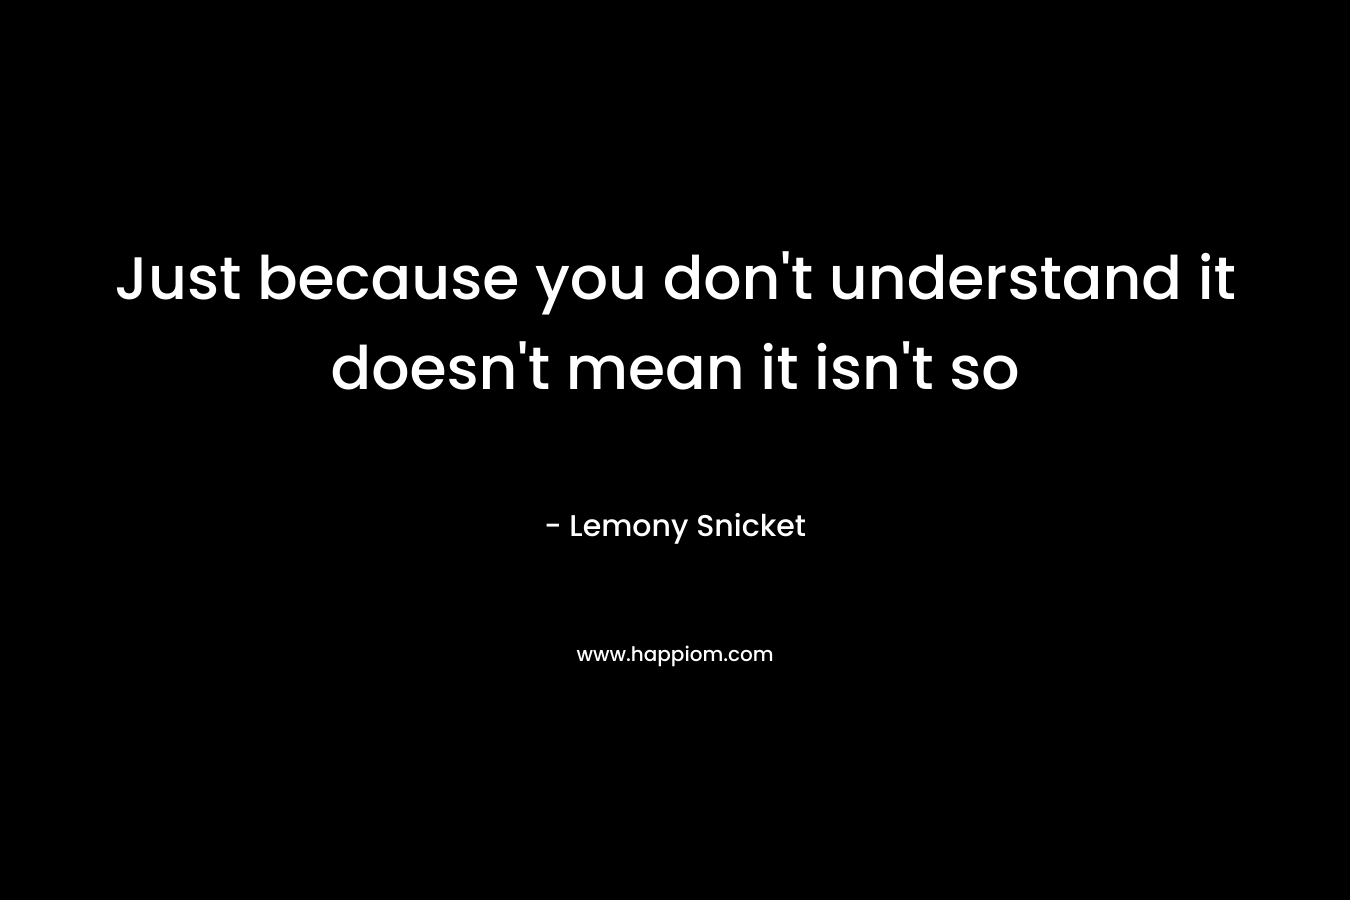 Just because you don't understand it doesn't mean it isn't so